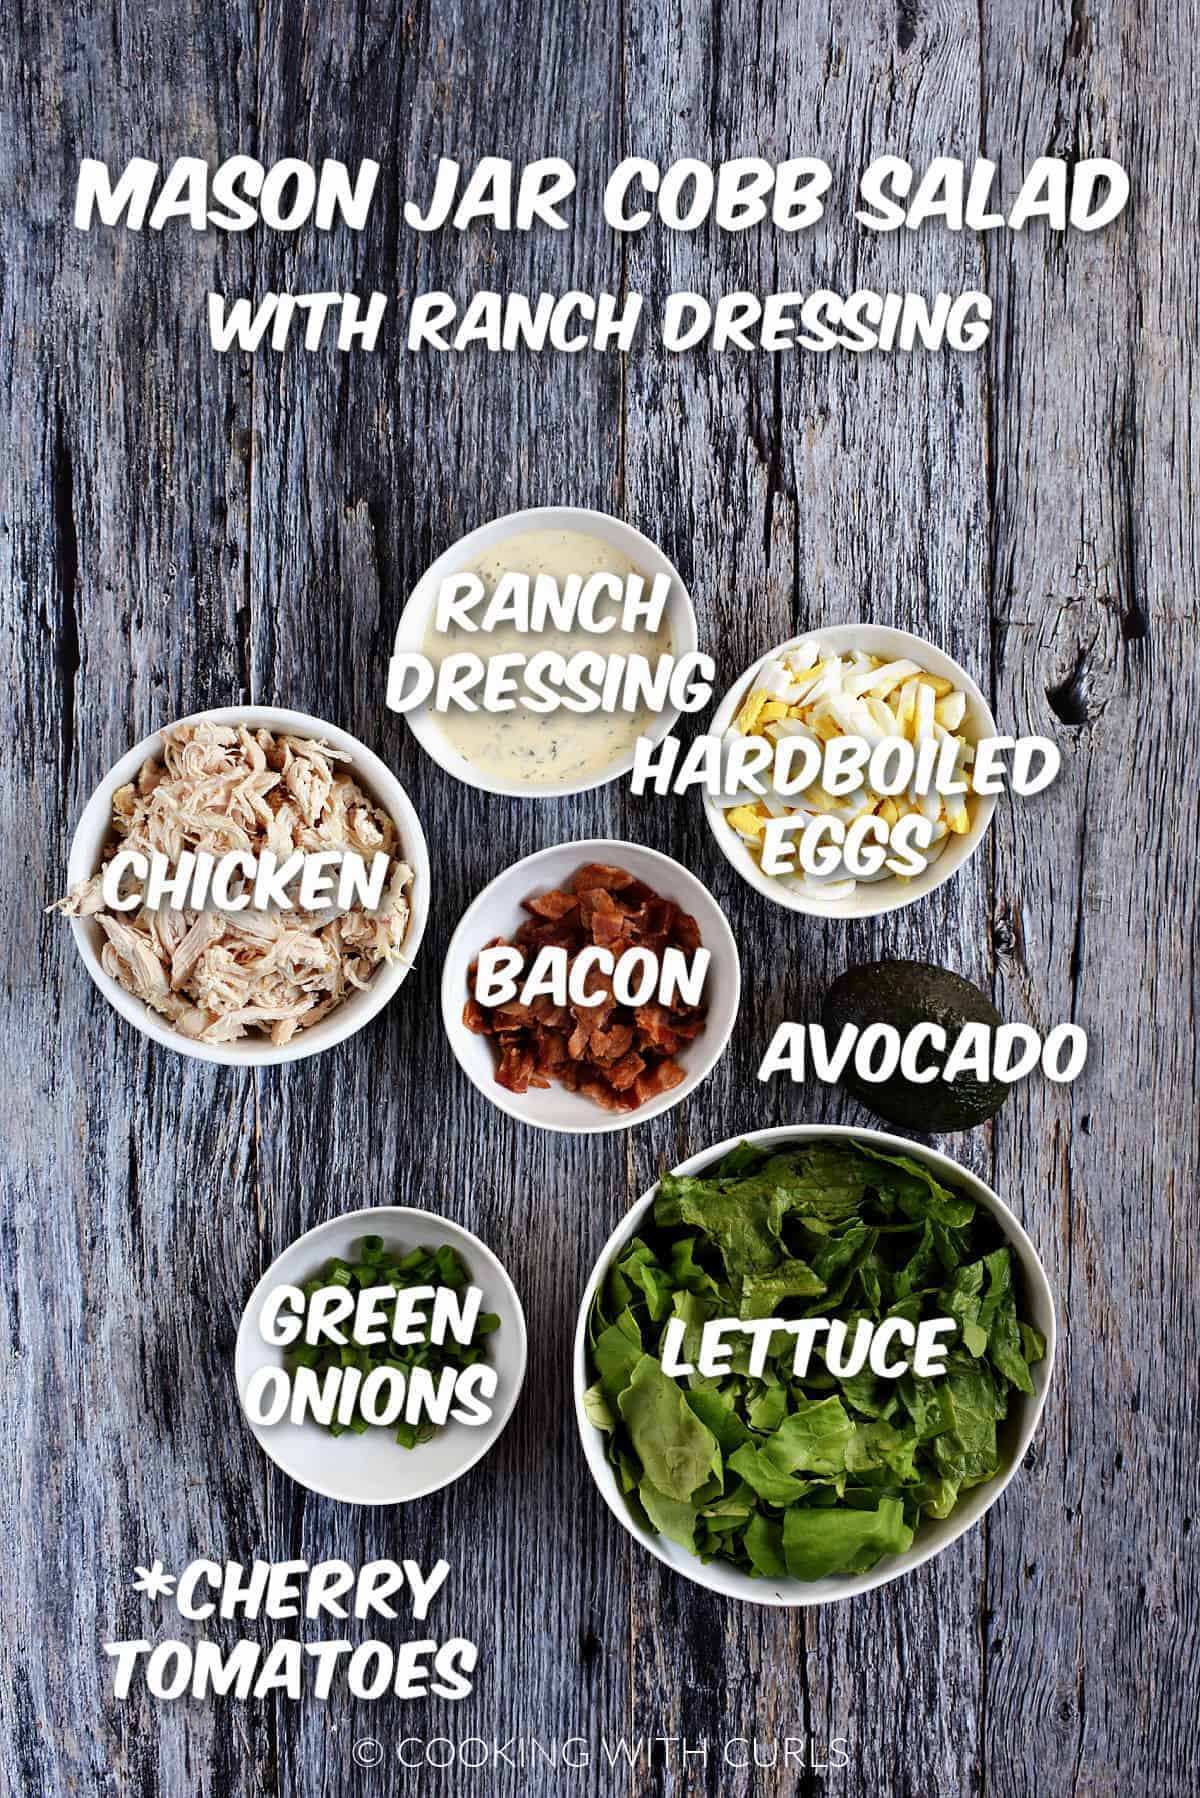 Ranch dressing, hardboiled eggs, avocado, bacon, chicken, green onions, and lettuce in white bowls and cherry tomatoes listed. 